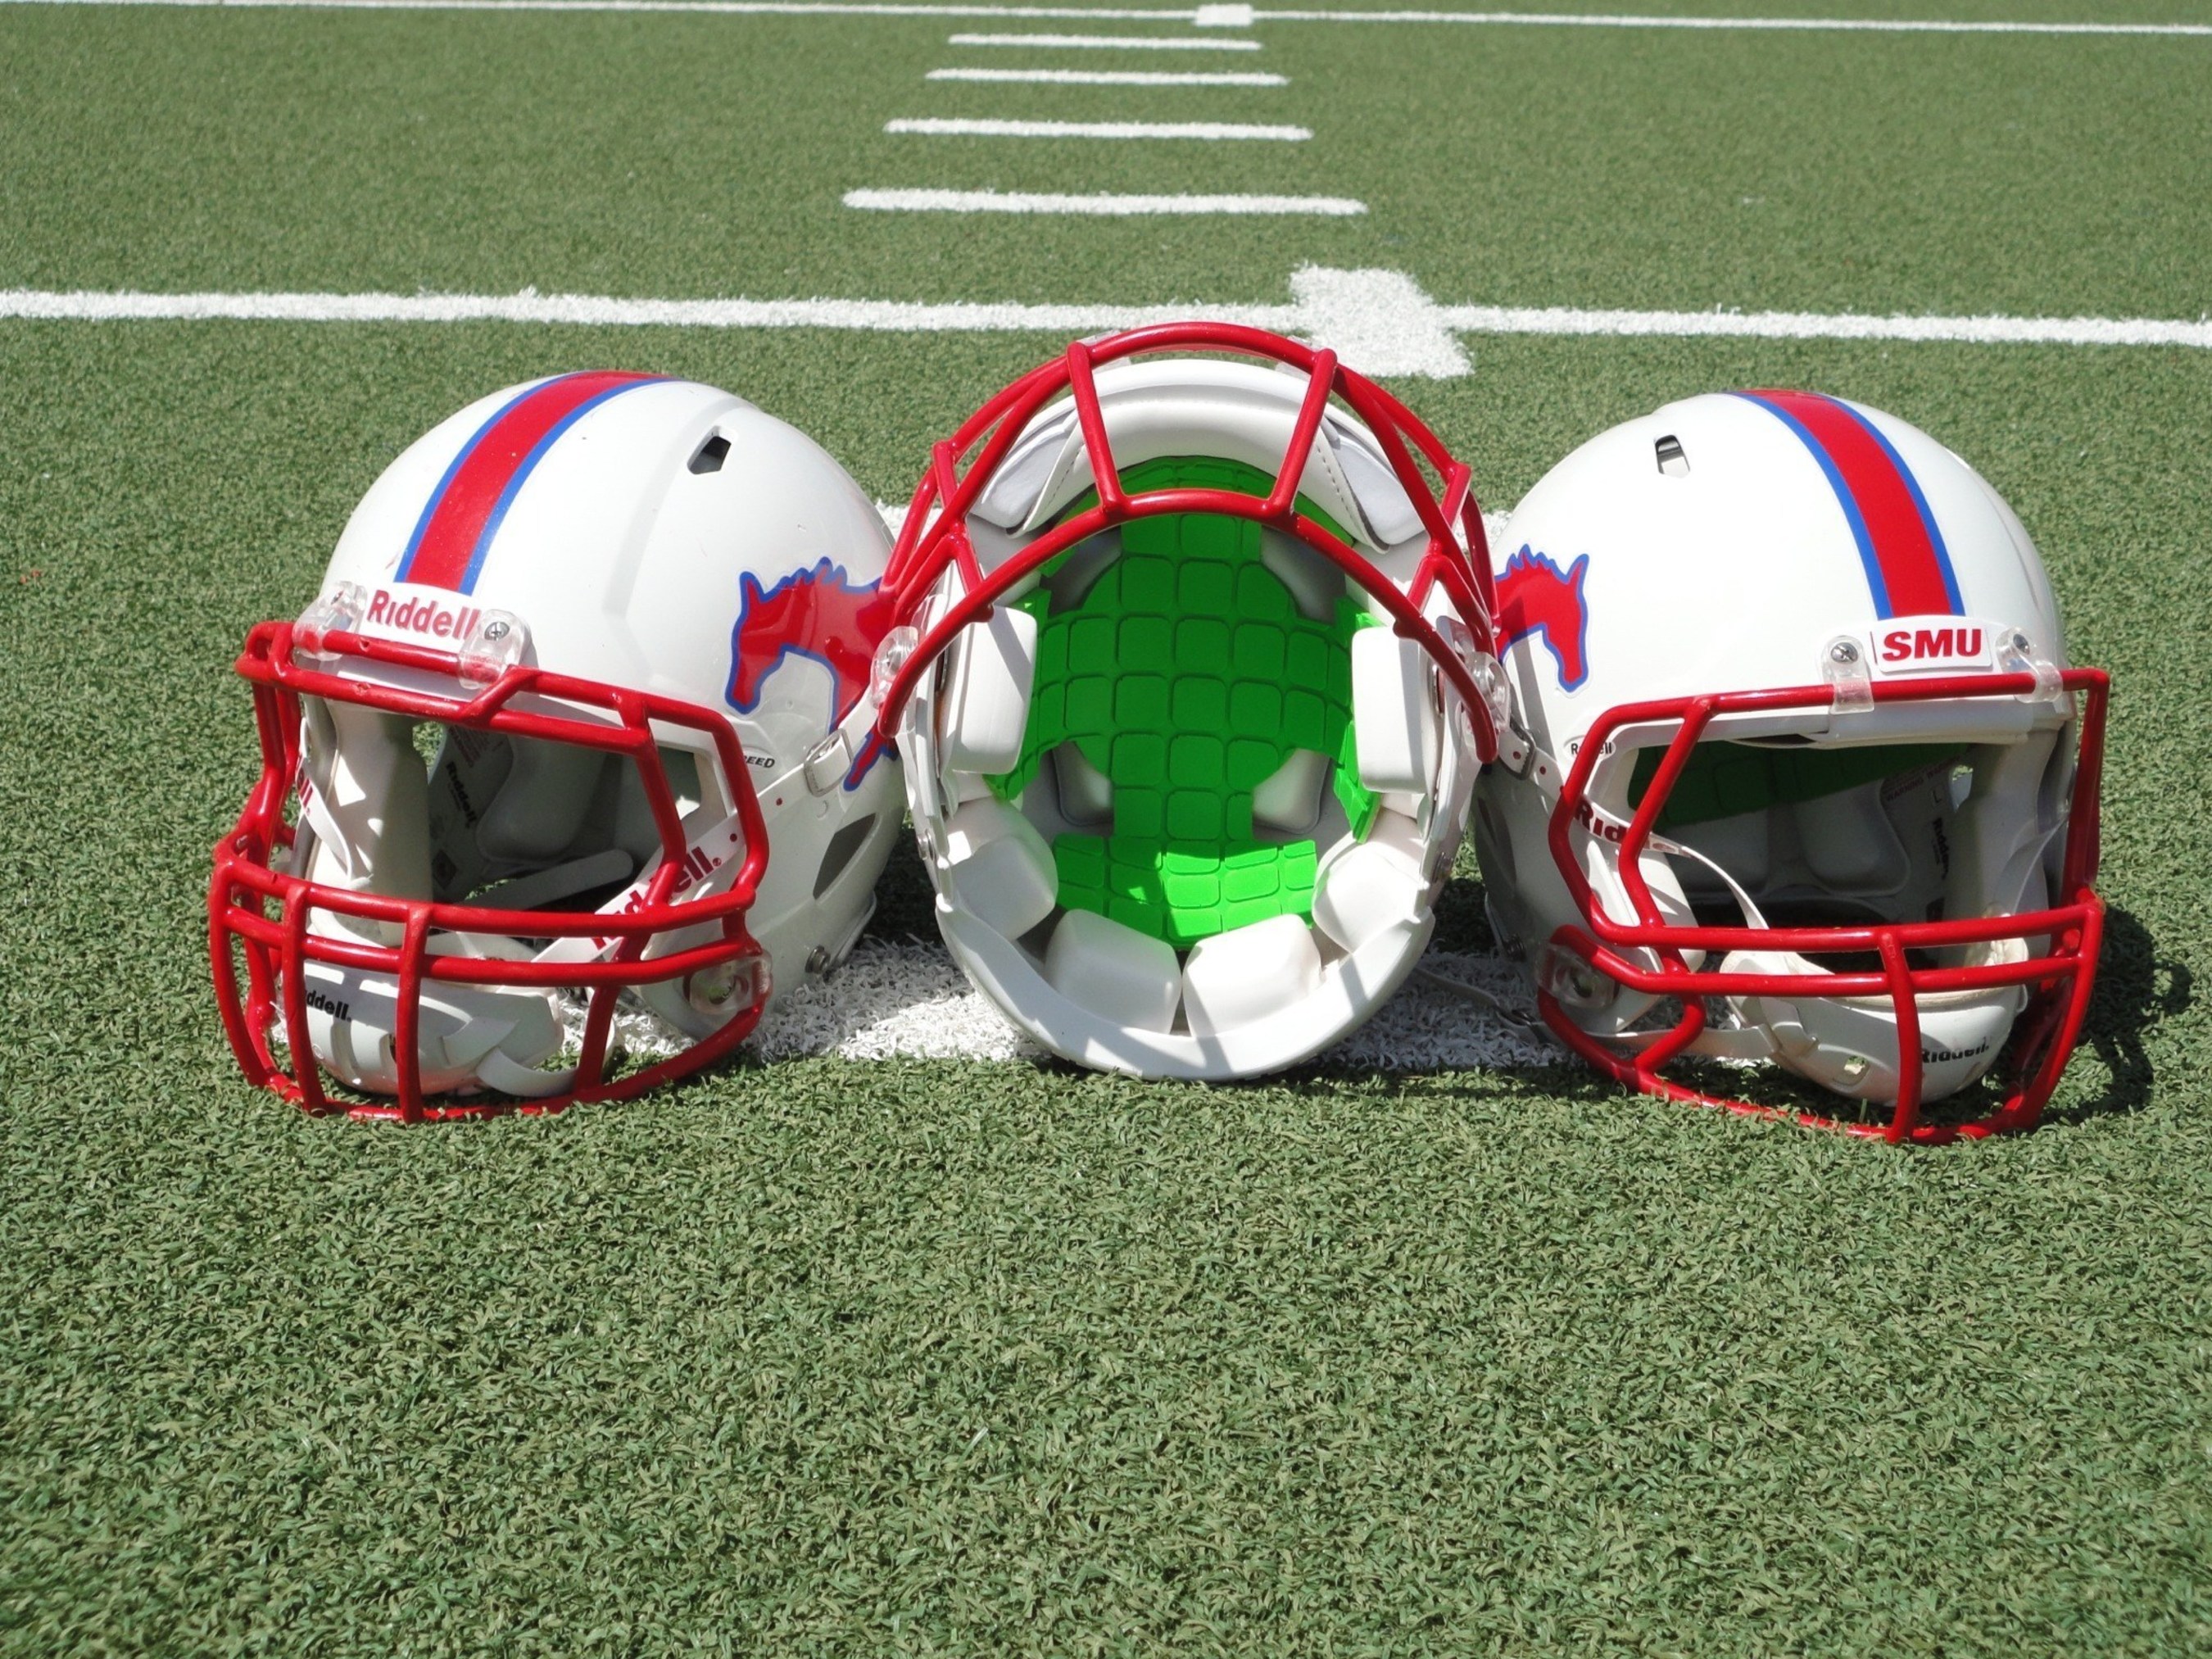 SMU Football is First Division I Program to Partner with Unequal for Head Protection. Pictured: Unequal Gyro in helmet (PRNewsFoto/Unequal Technologies)